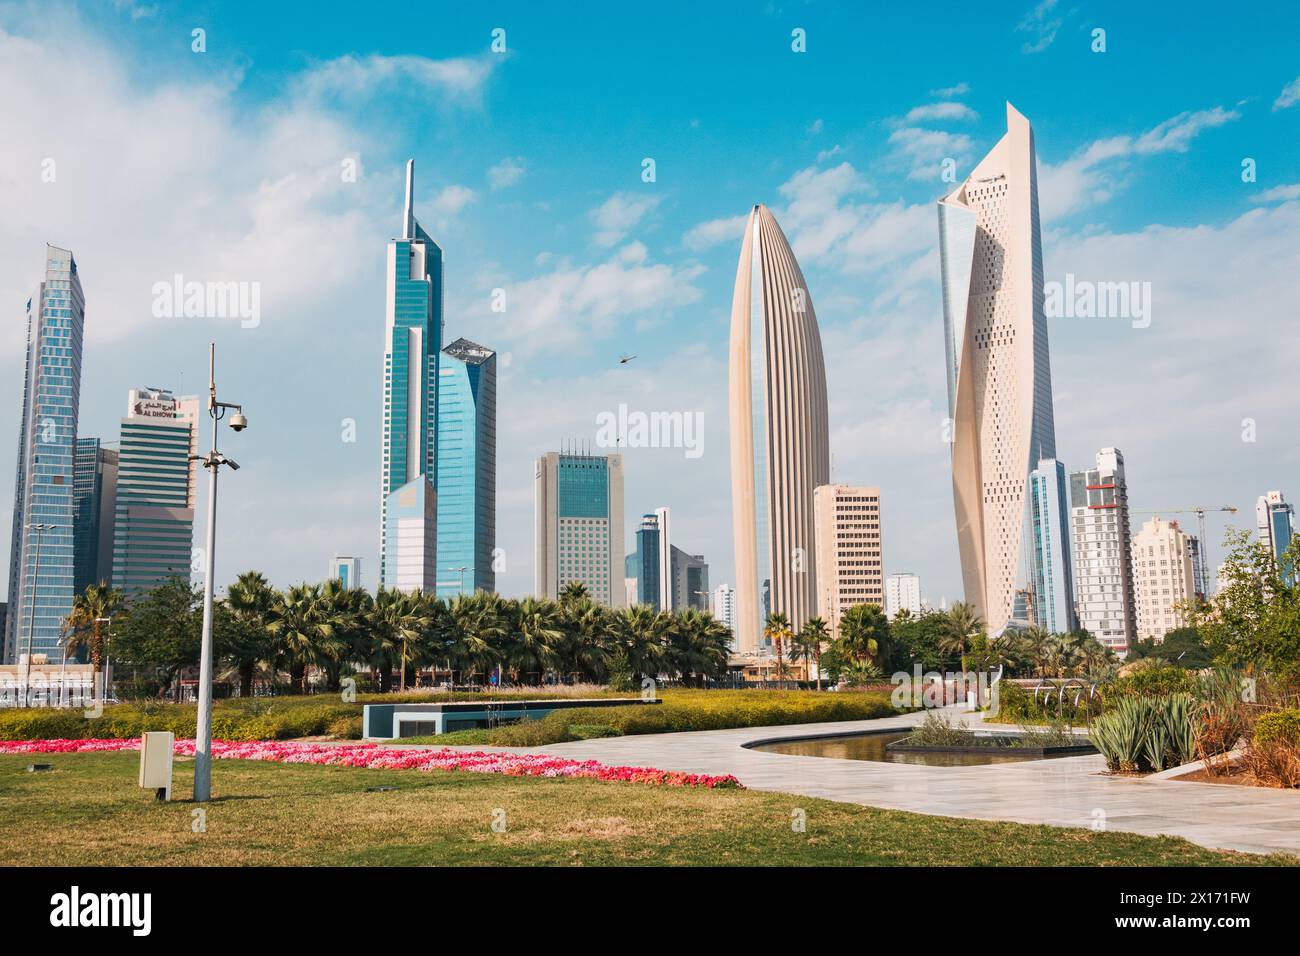 Skyscrapers in the business district of Kuwait City, notably Al Hamra tower, Kuwait's tallest building and world's tallest curved skyscraper Stock Photo